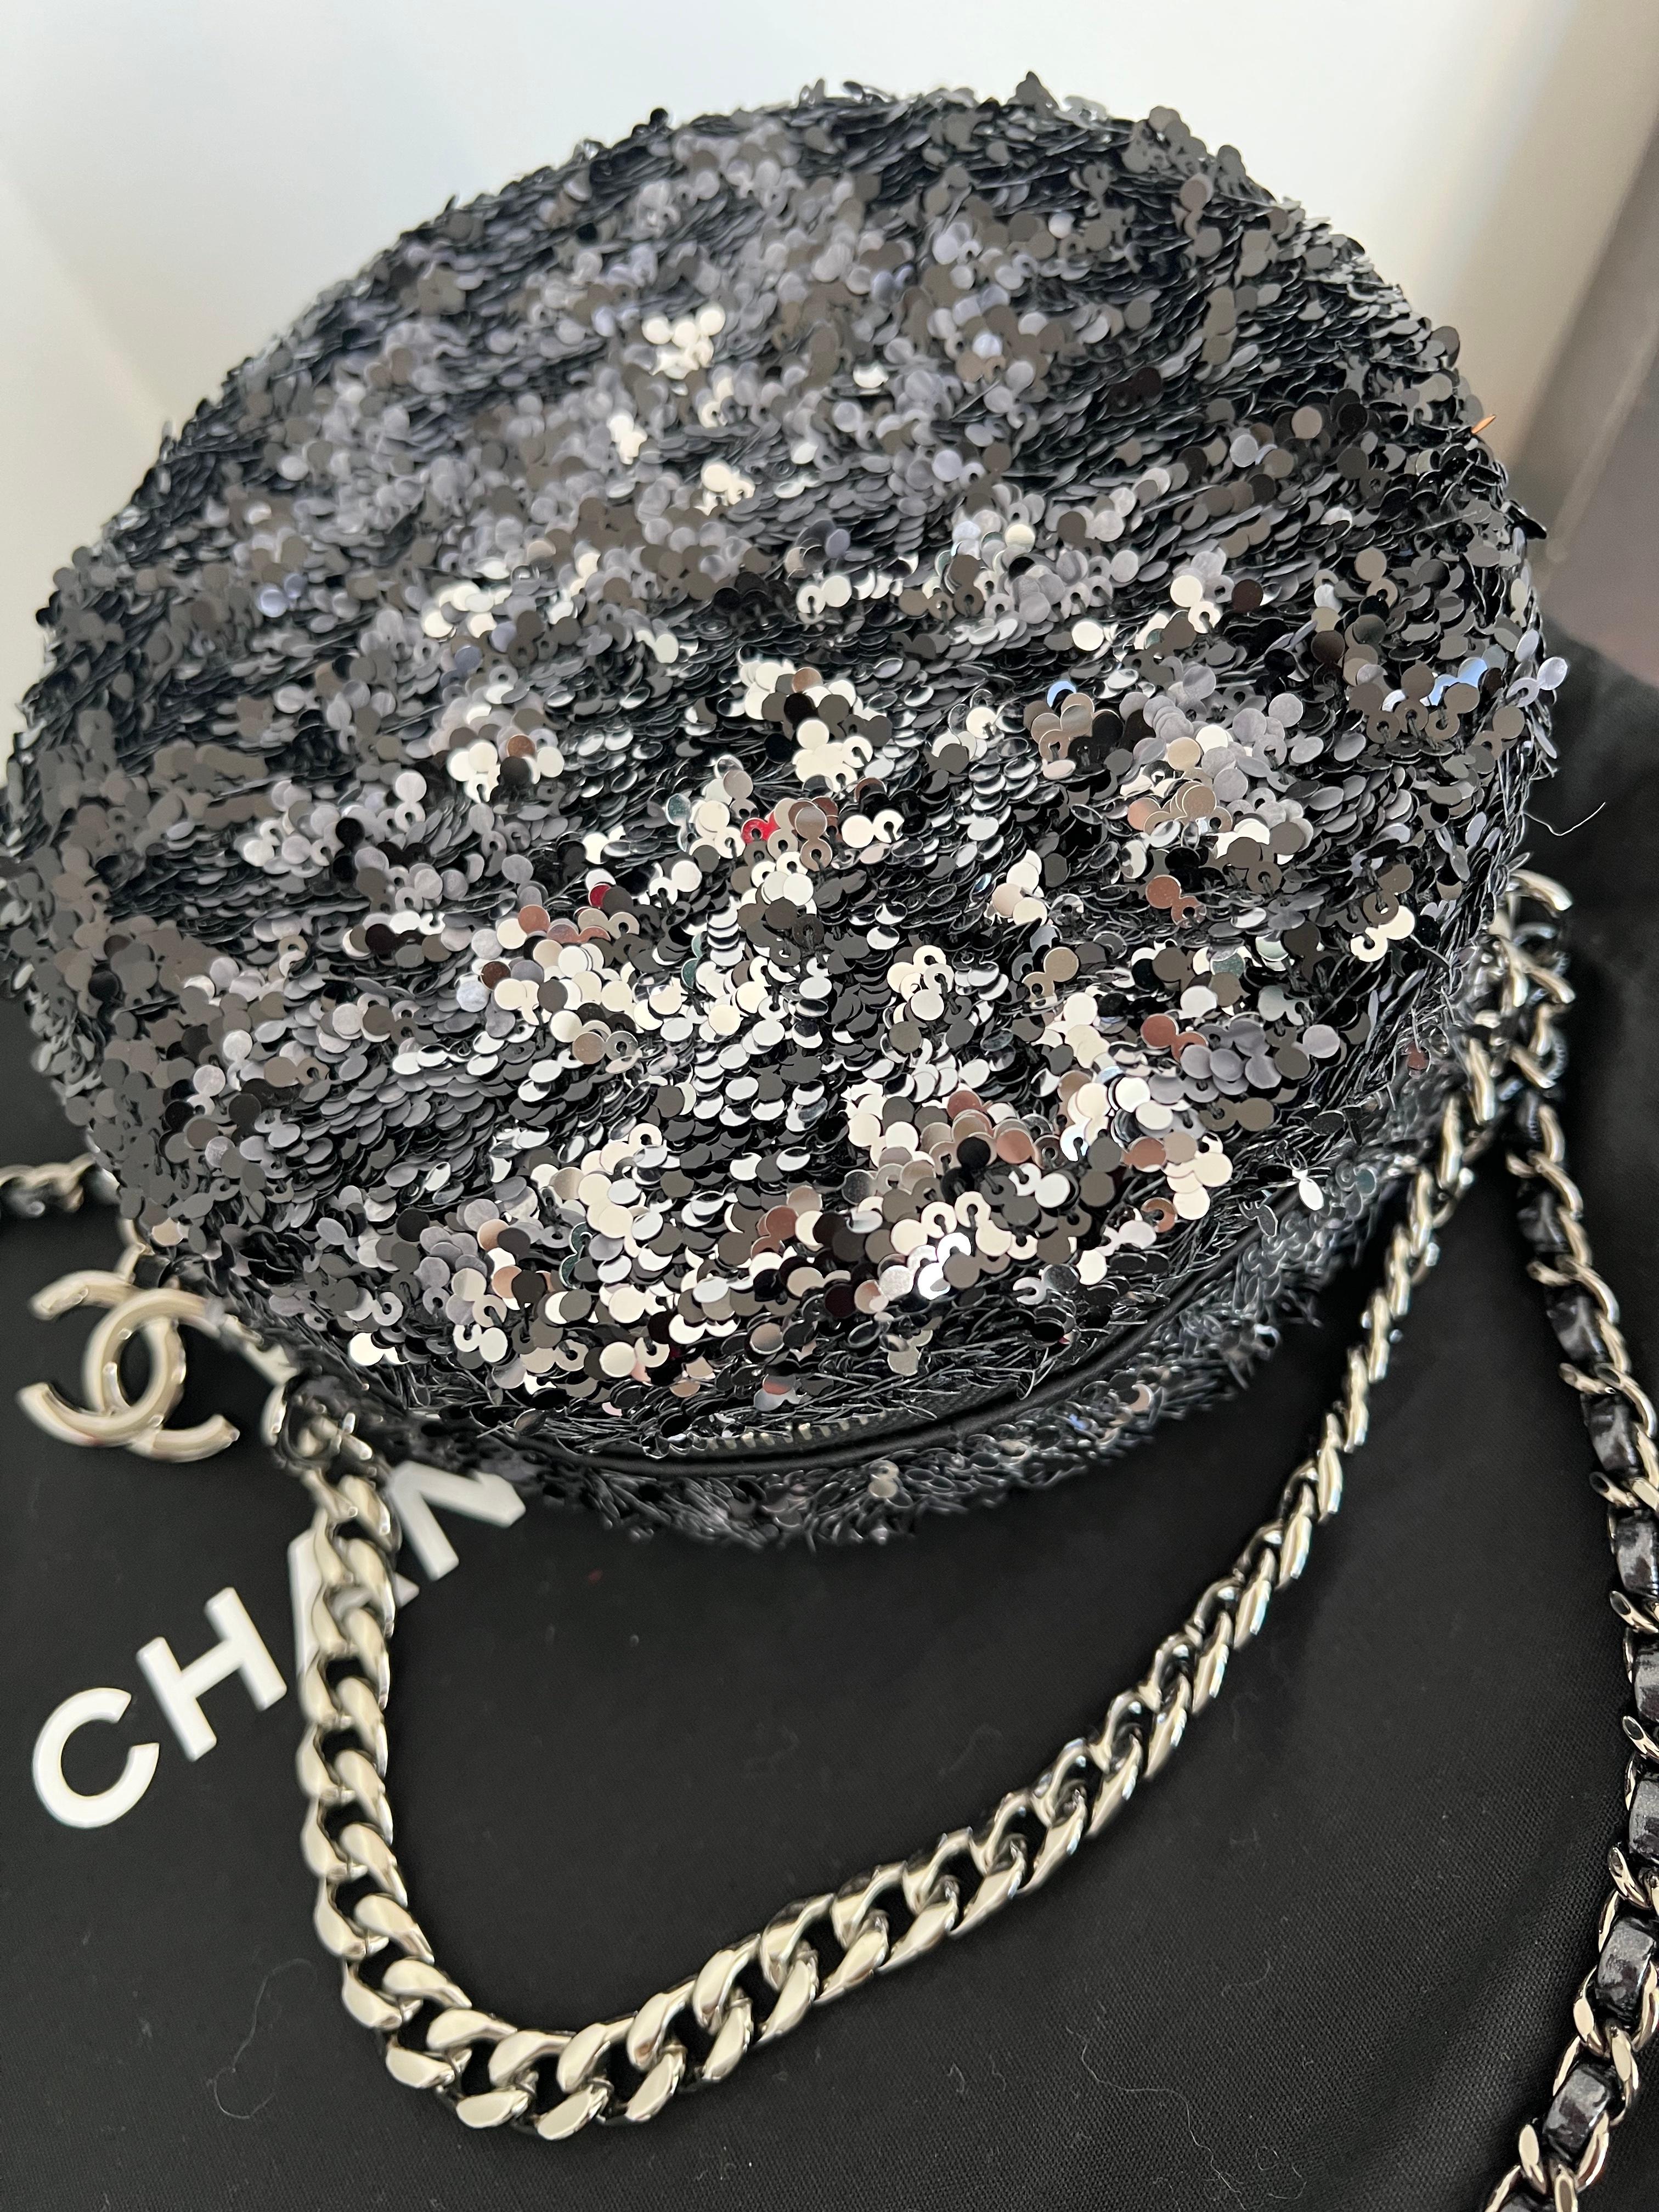 Chanel Sequin Clutch - 8 For Sale on 1stDibs